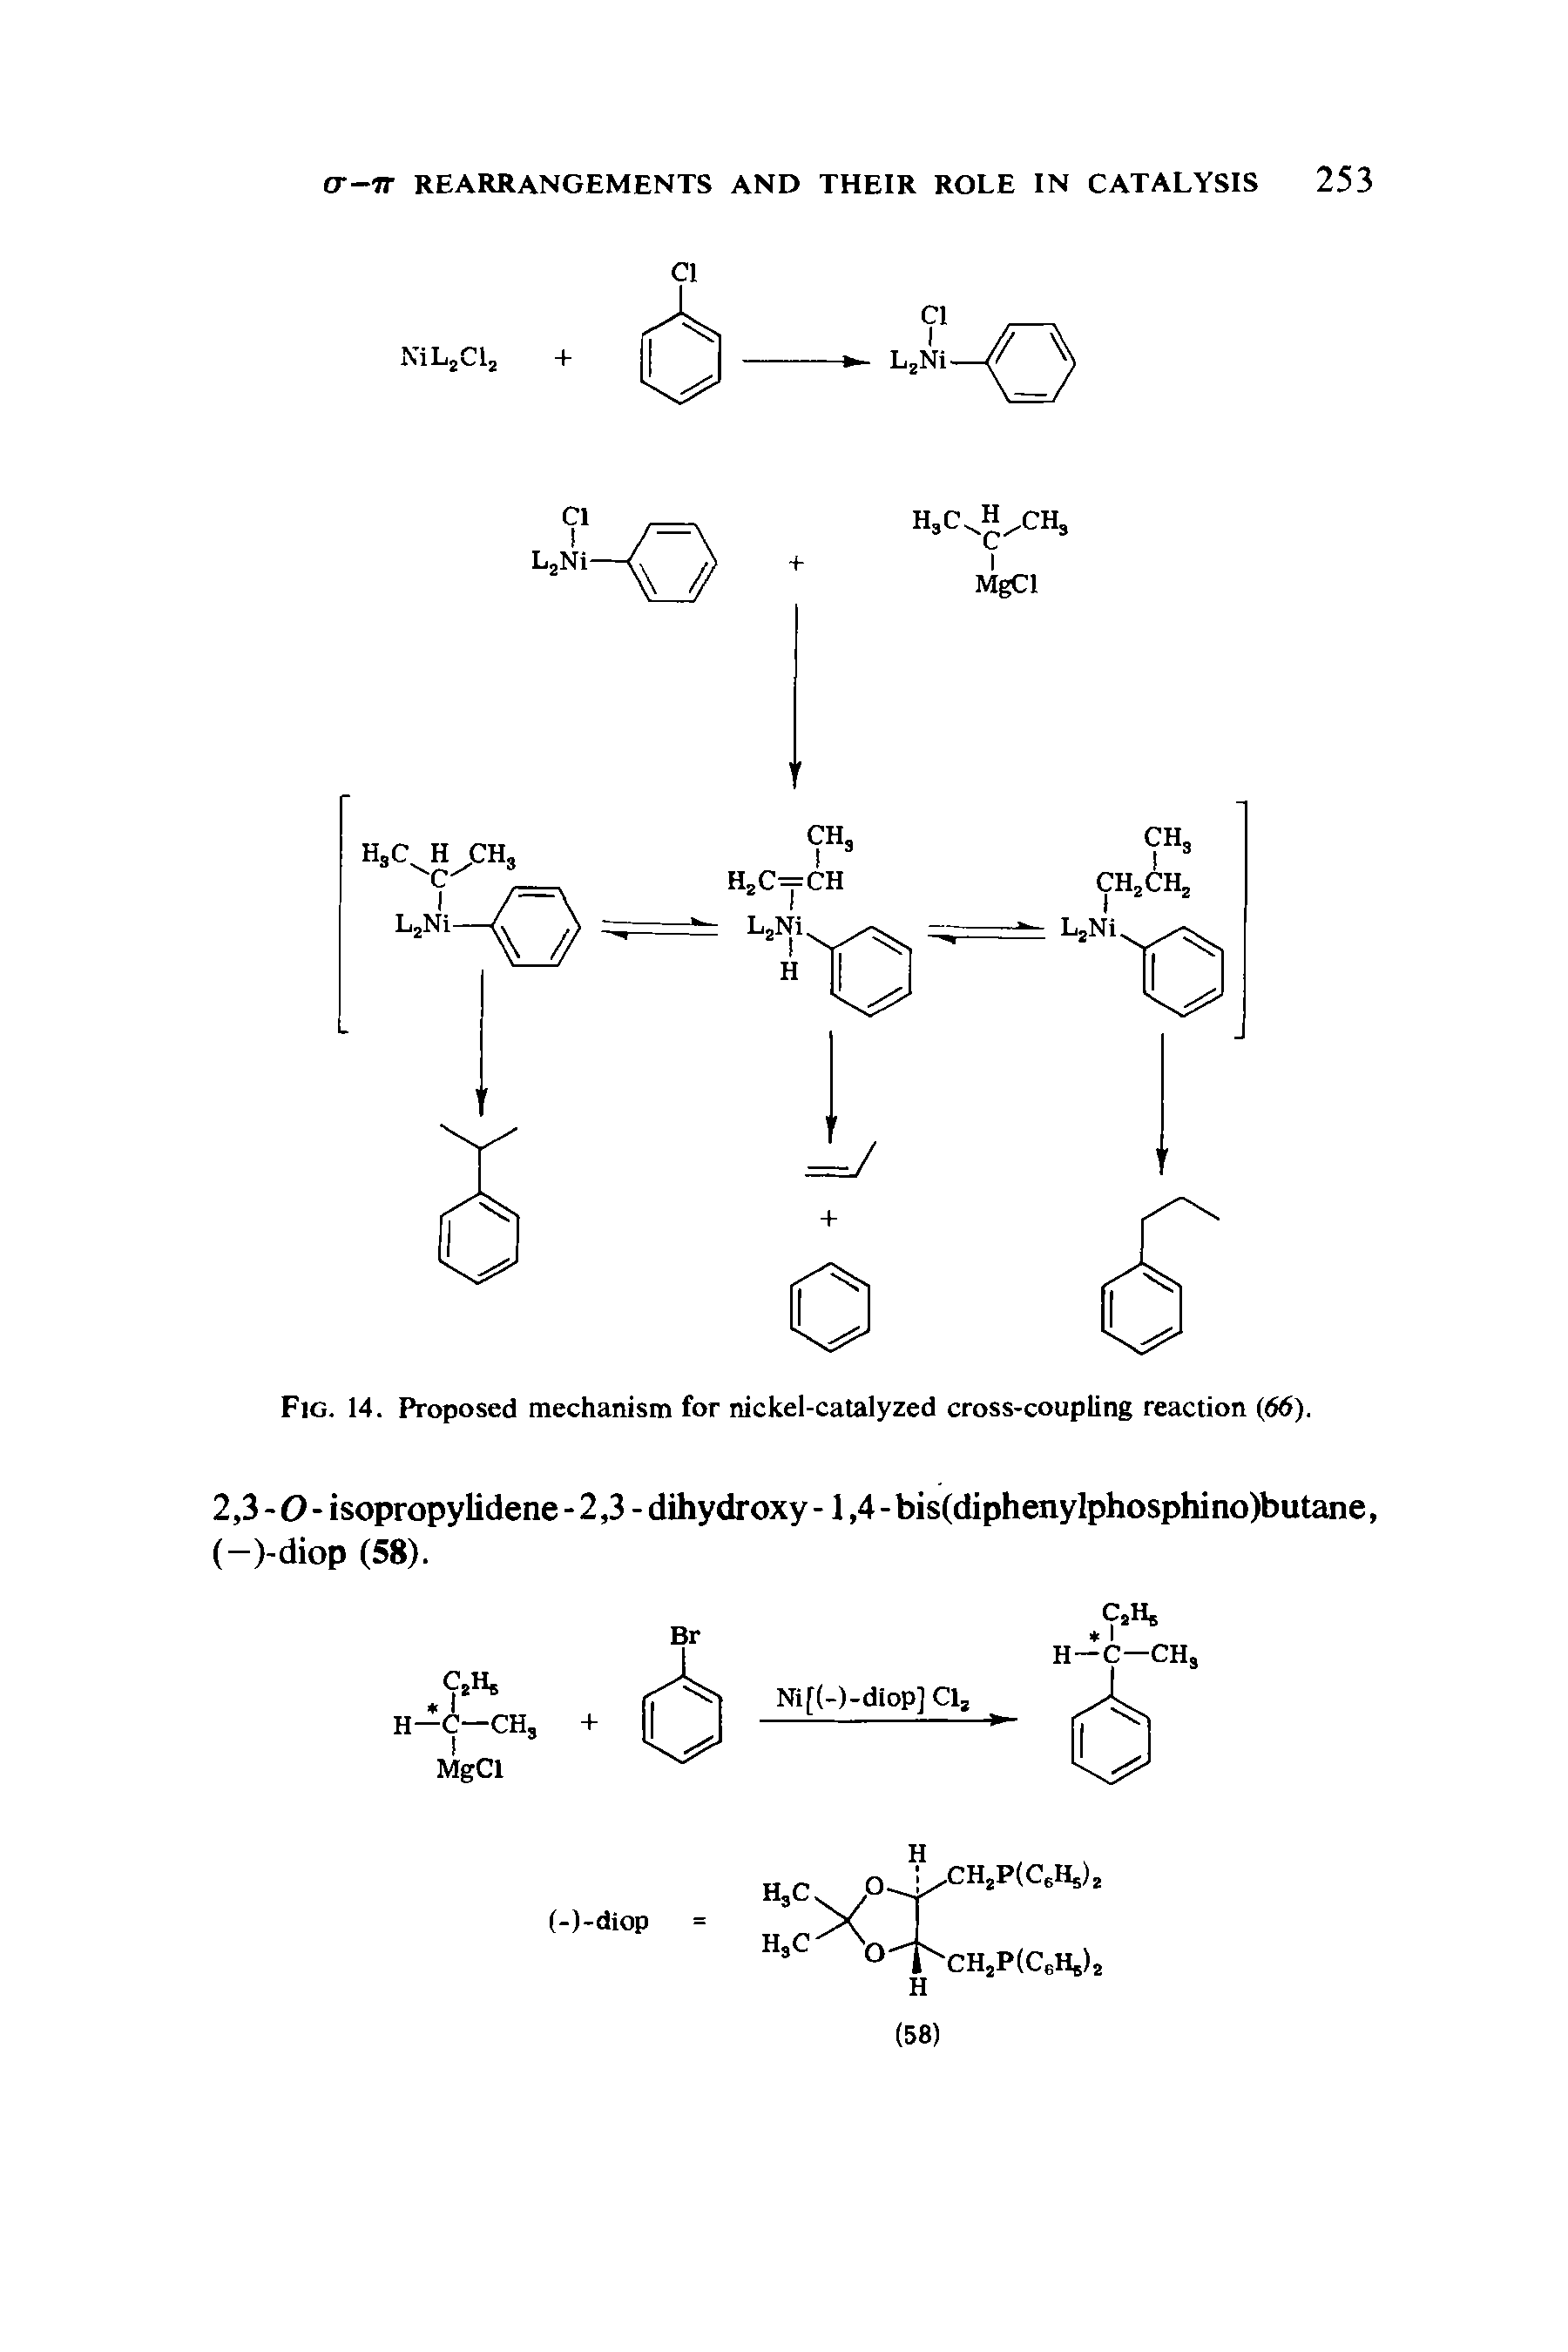 Fig. 14. Proposed mechanism for nickel-catalyzed cross-coupling reaction 66).